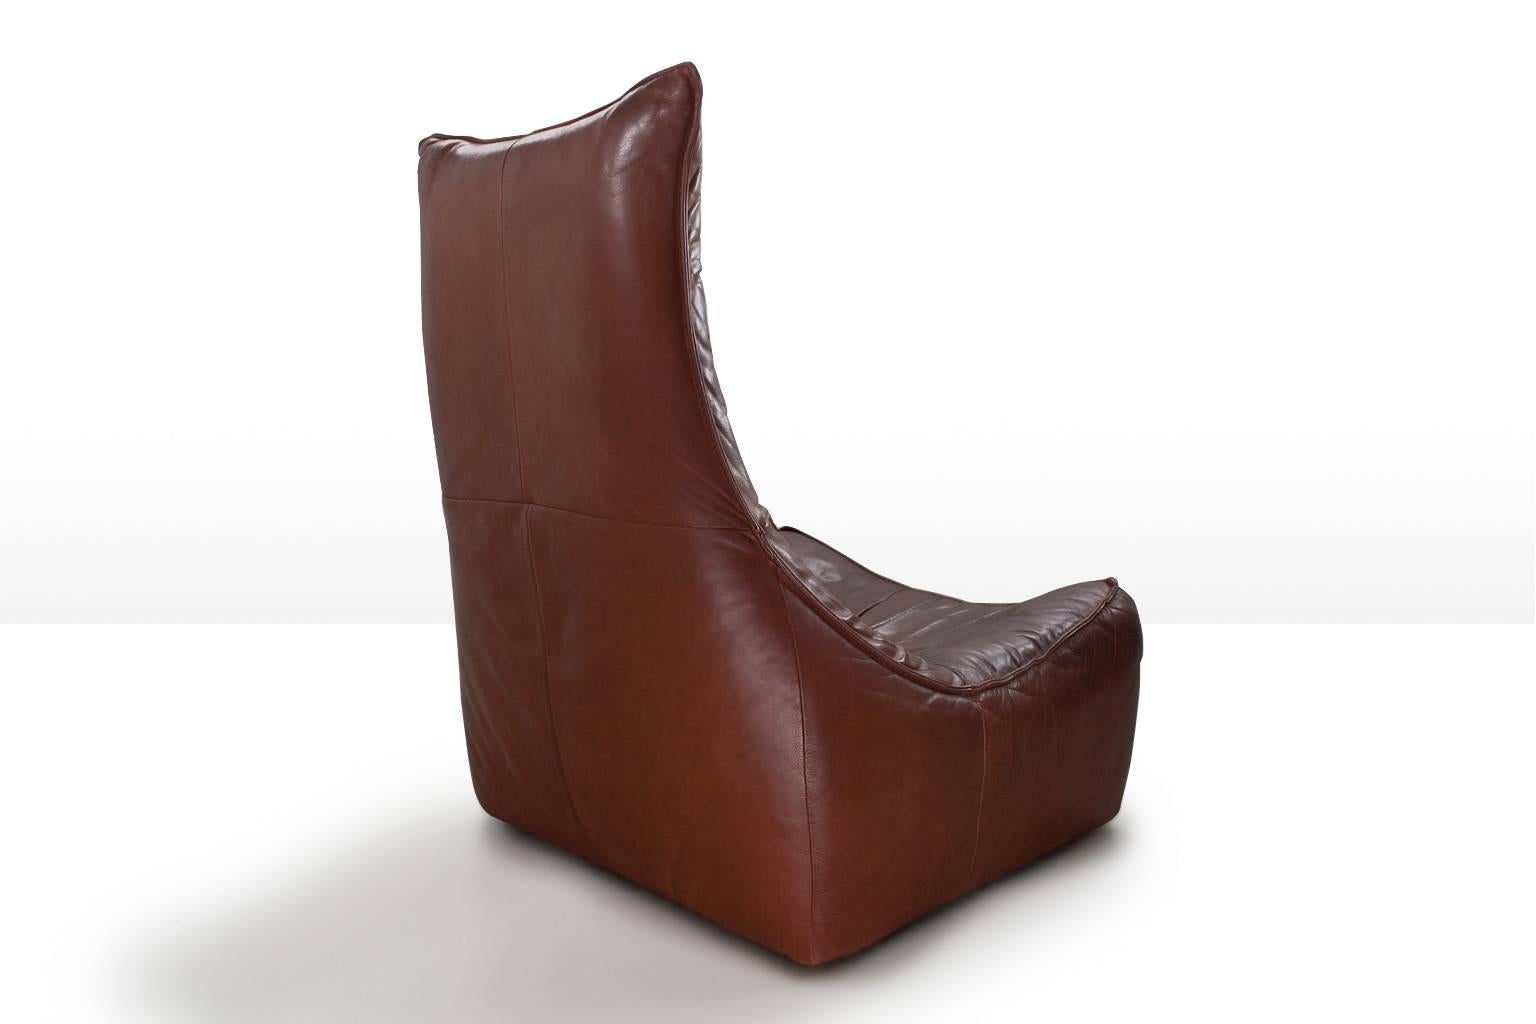 Original and beautiful lounge chair in a burgundy brown/ cognac colored aniline leather designed by Dutch designer Gerard Van Den Berg for label Montis in 1970. Beautiful piece of vintage design. In original condition, nice preserved patina to